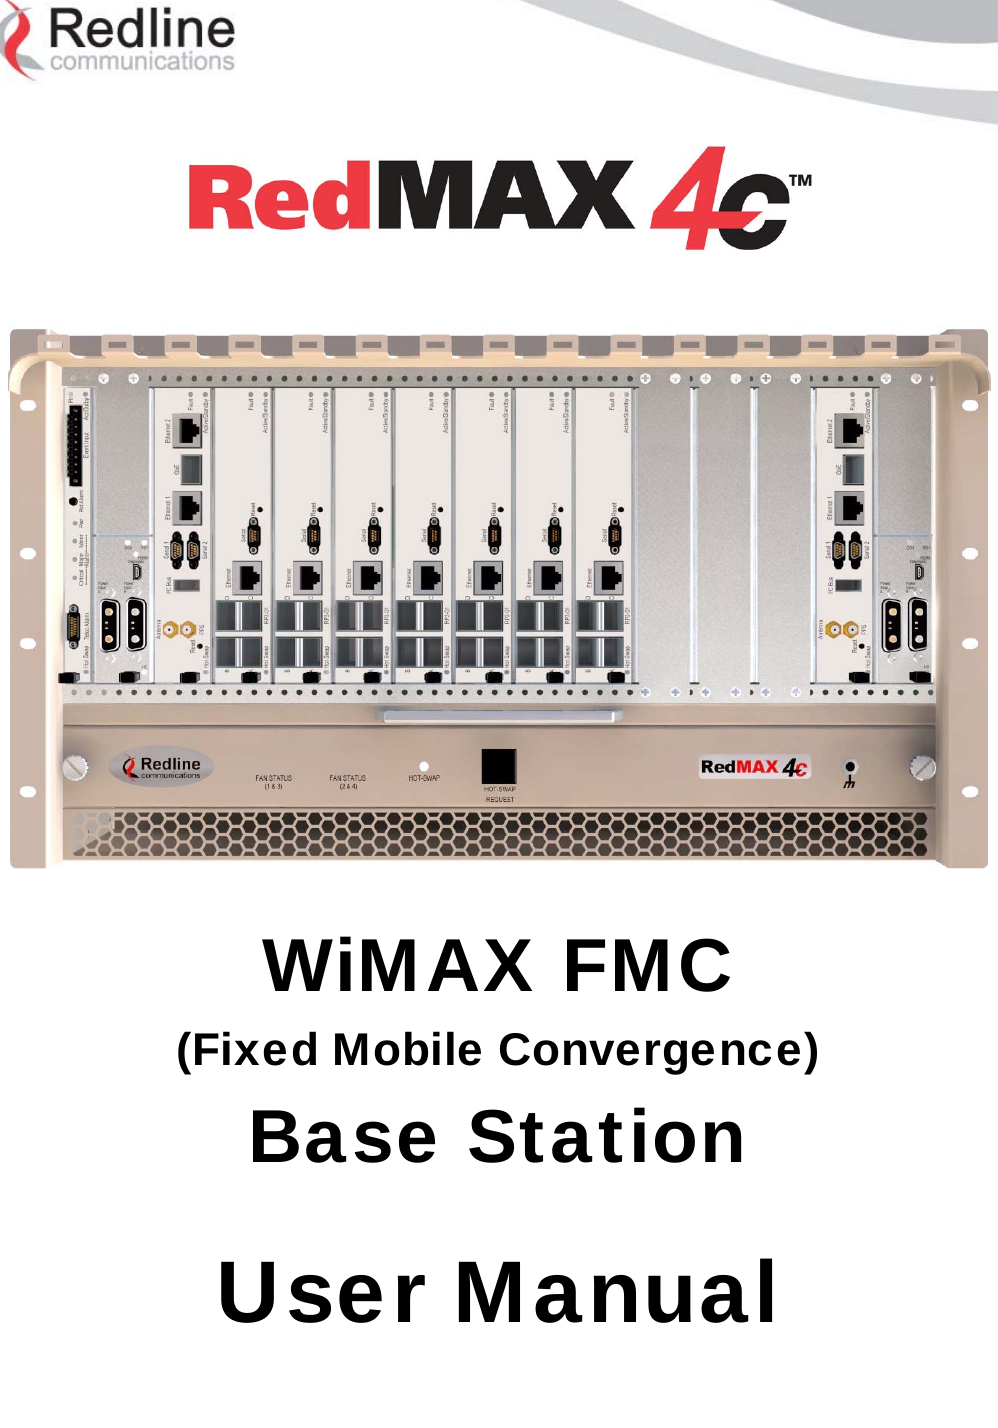  70-00100-01-00-DRAFT  Proprietary Redline Communications © 2009   Page 1 of 60  January 7, 2009        WiMAX FMC (Fixed Mobile Convergence) Base Station  User Manual   